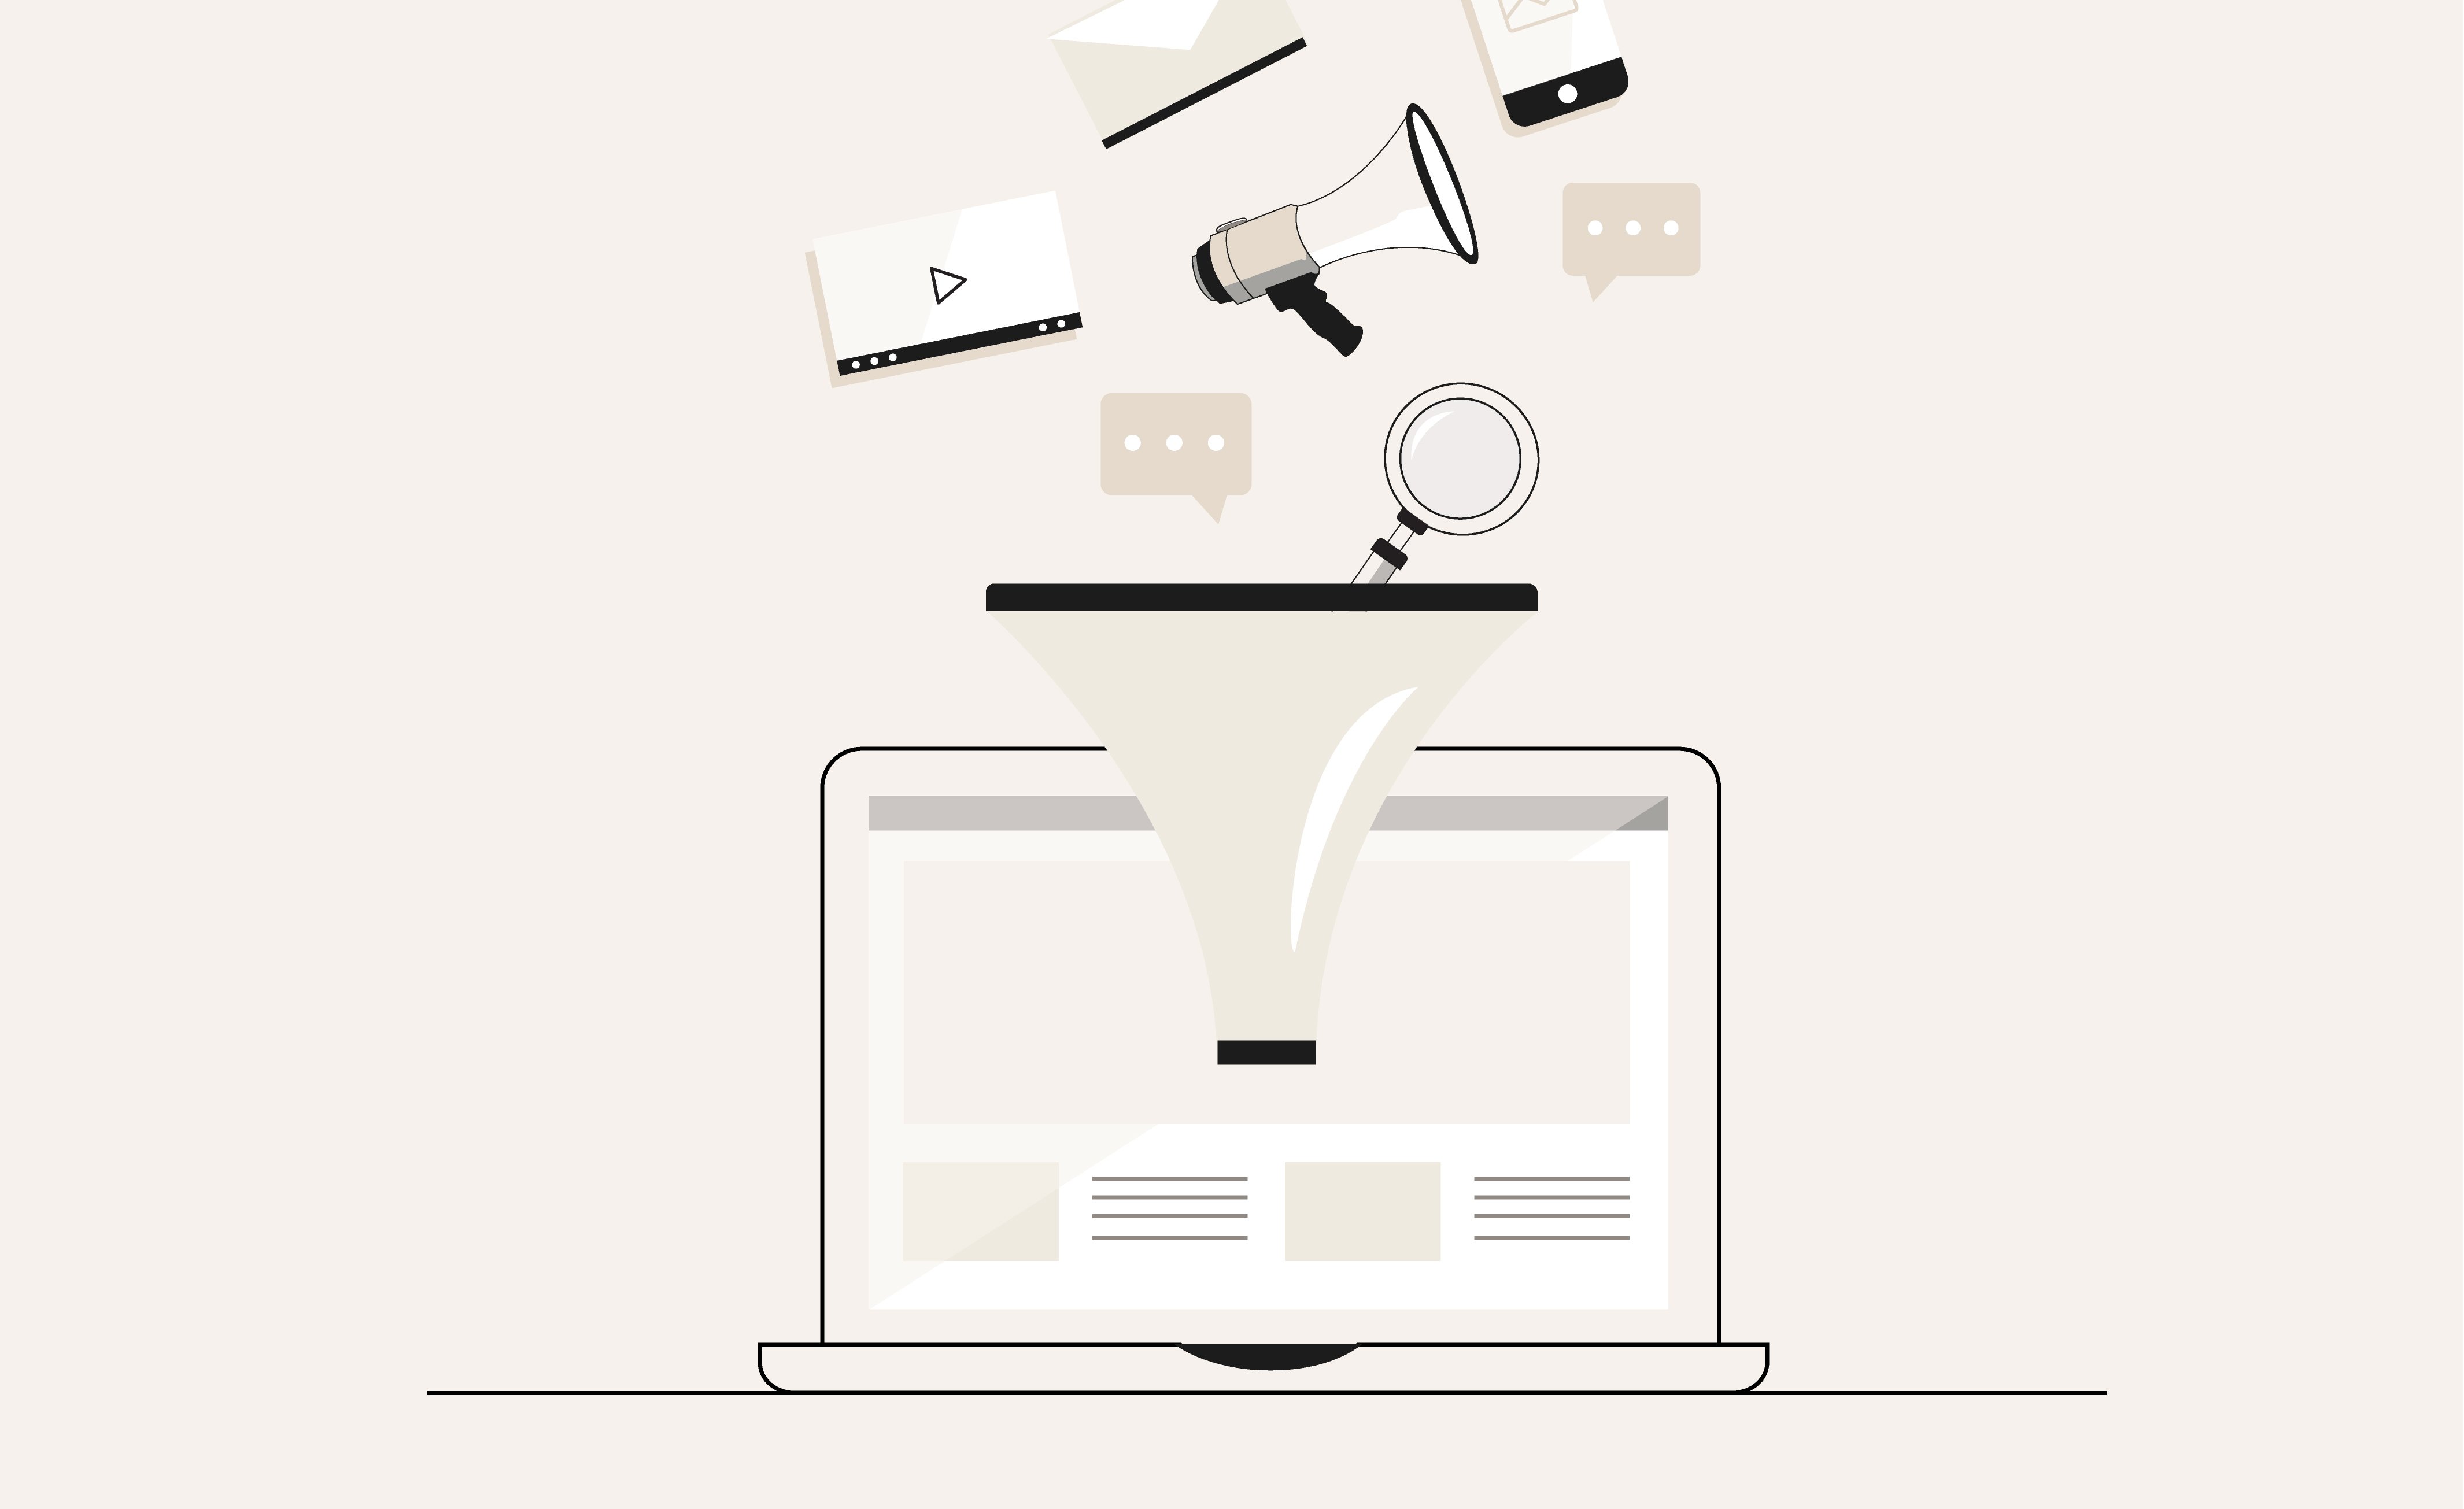 Illustration of business tools funneling into an ecommerce website displayed on a laptop.